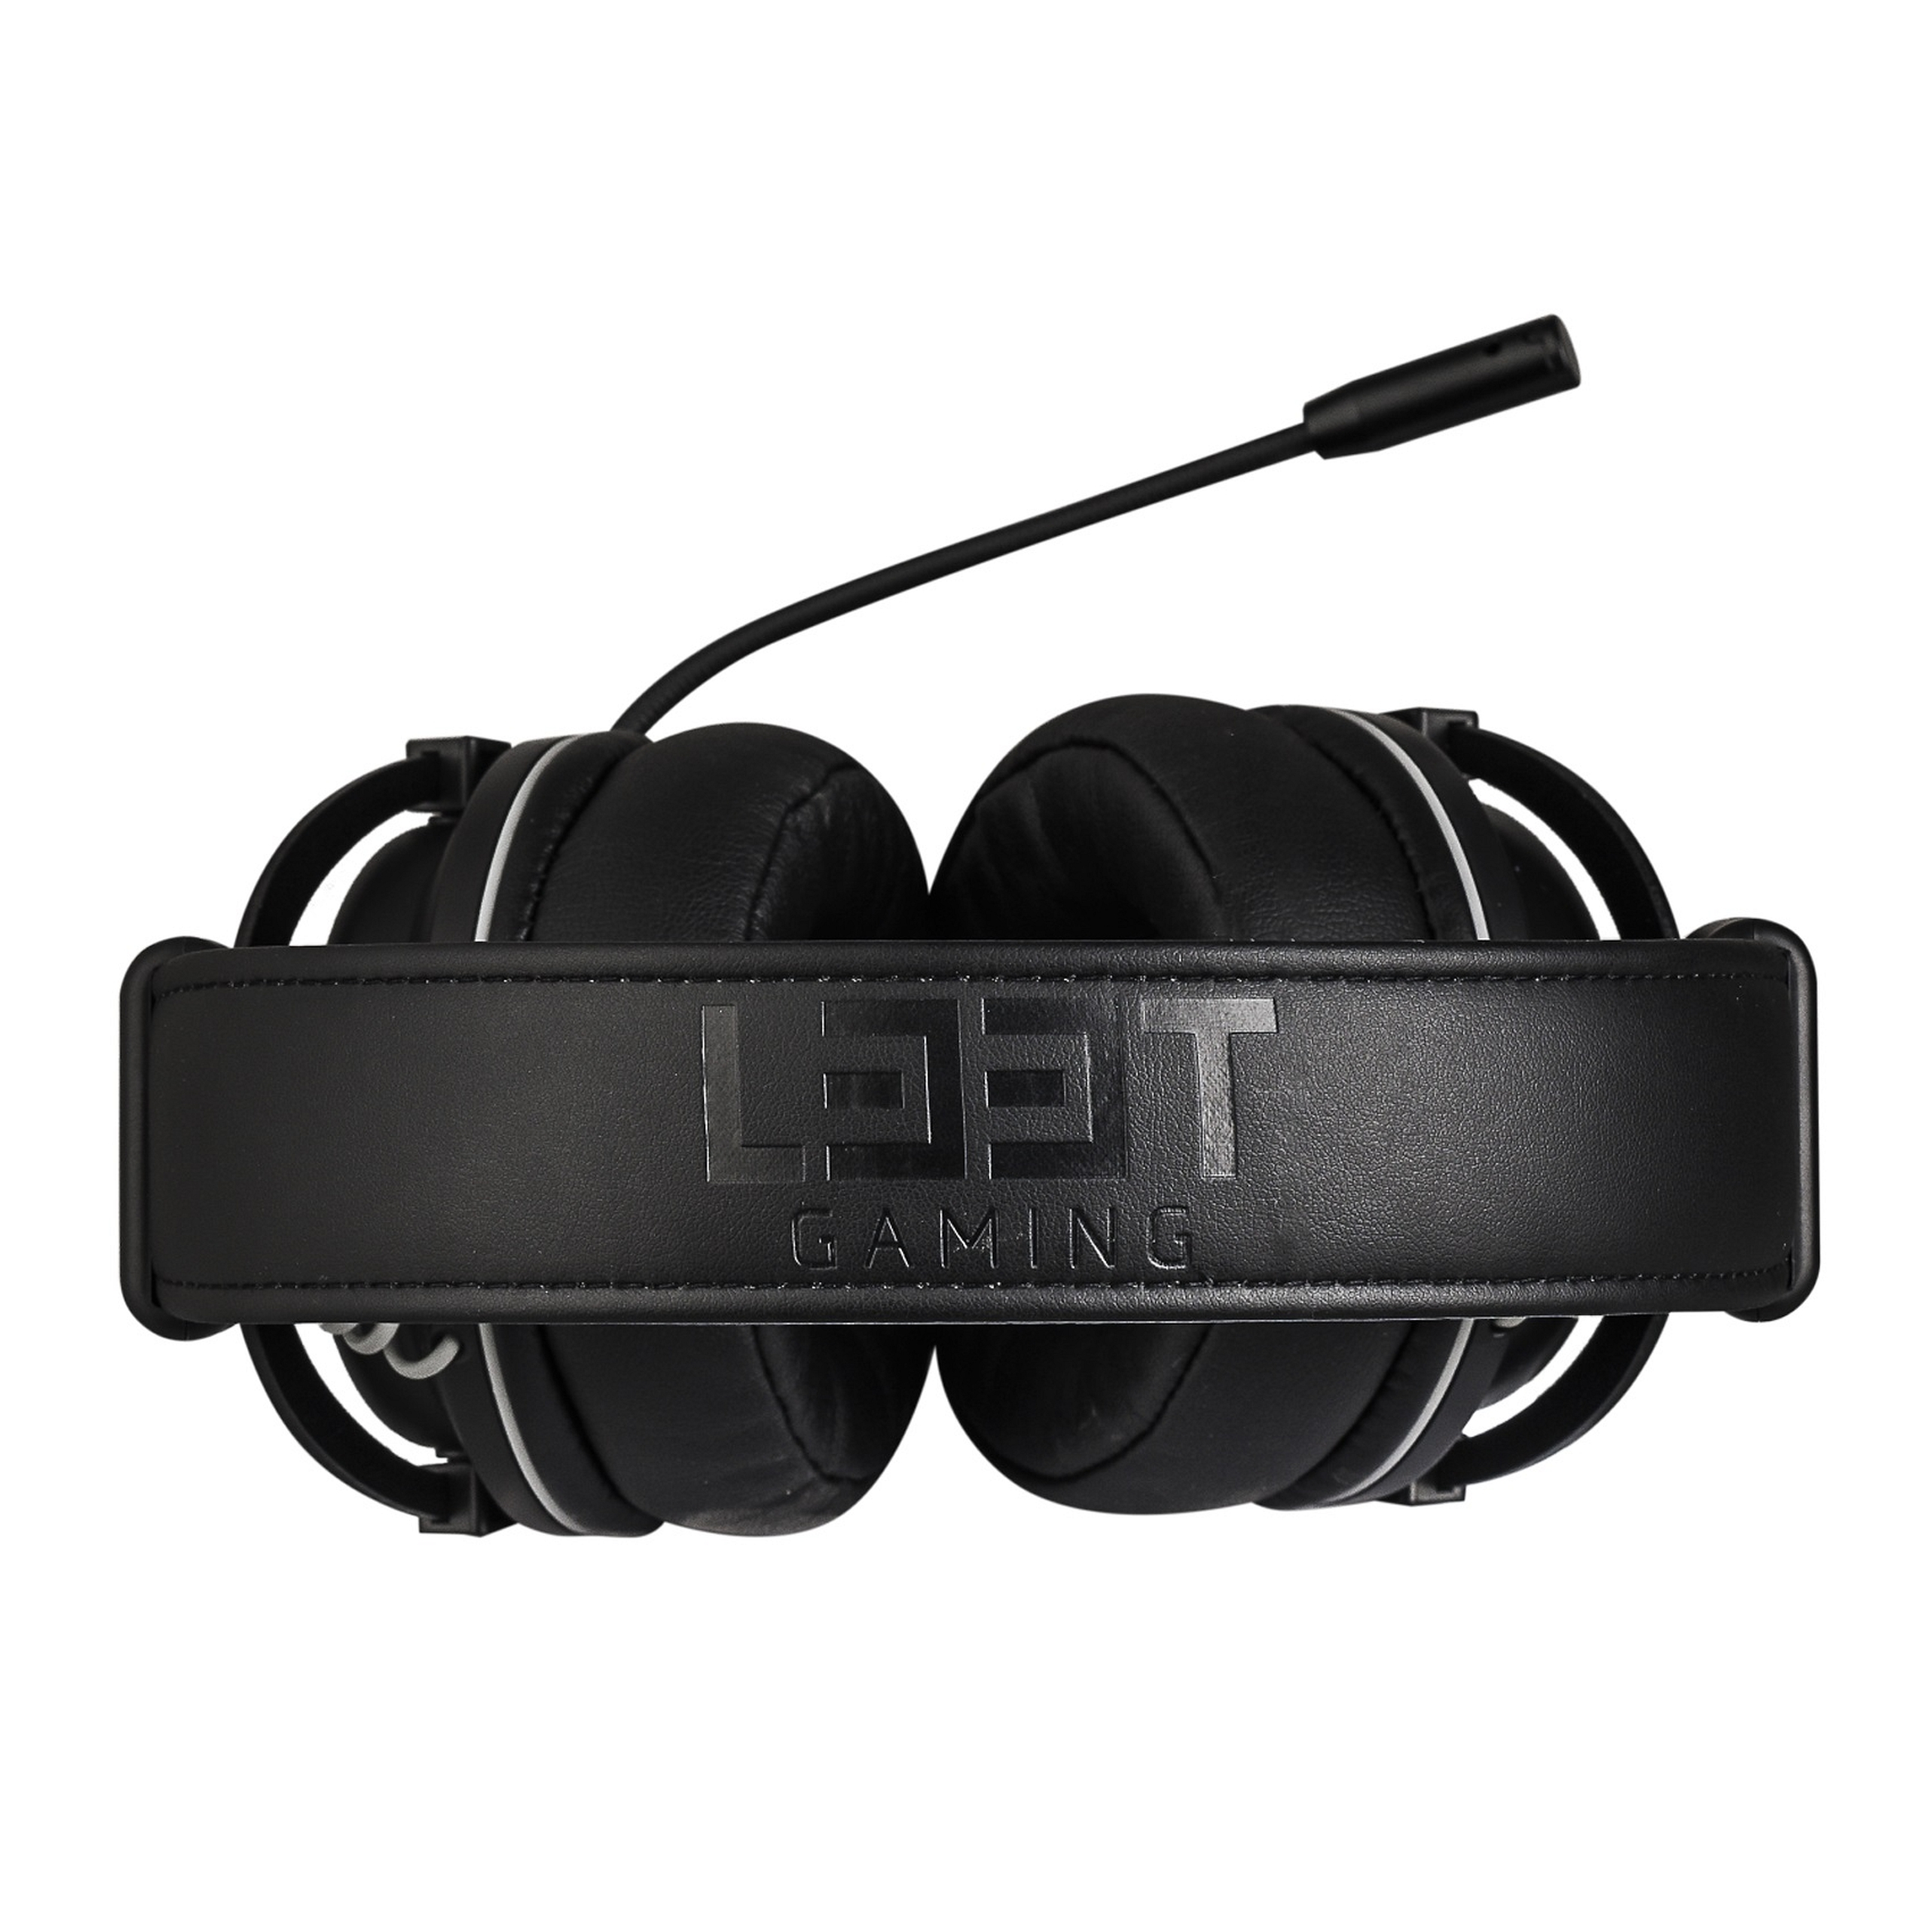 L33T 160376, Over-ear Gaming Headset cremeweiß